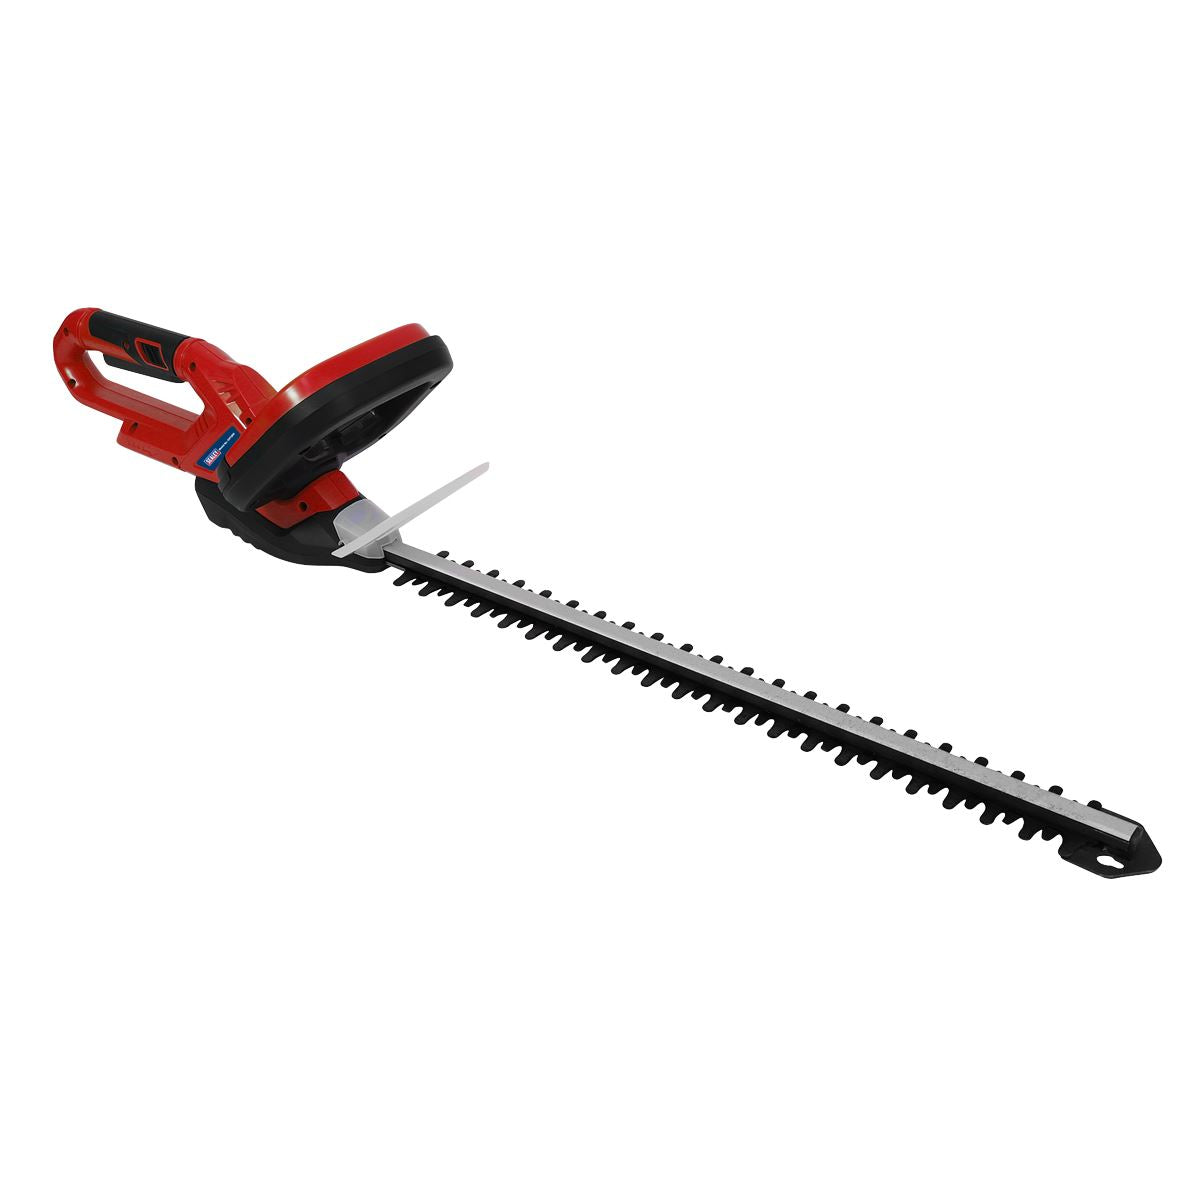 Sealey 20V Cordless 520mm Hedge Trimmer Body Only